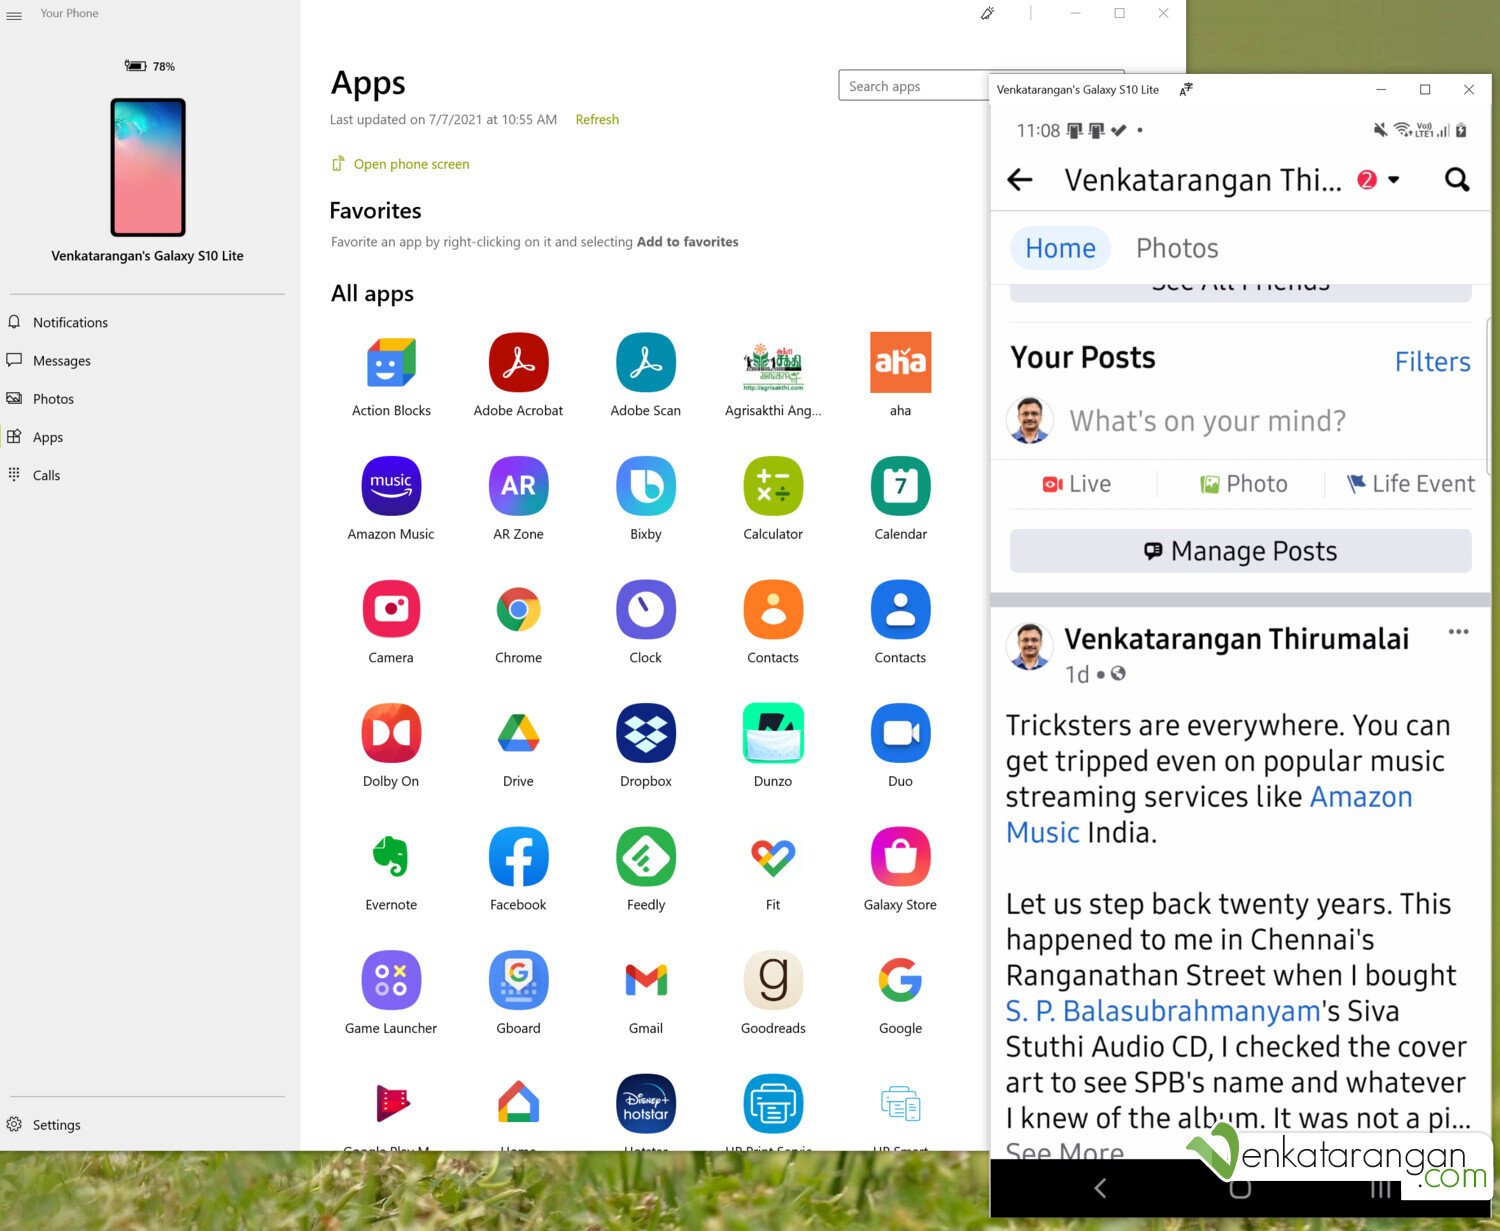 Windows 10 Your Phone App showing apps running from Samsung Galaxy S10 Lite and Facebook app on the right